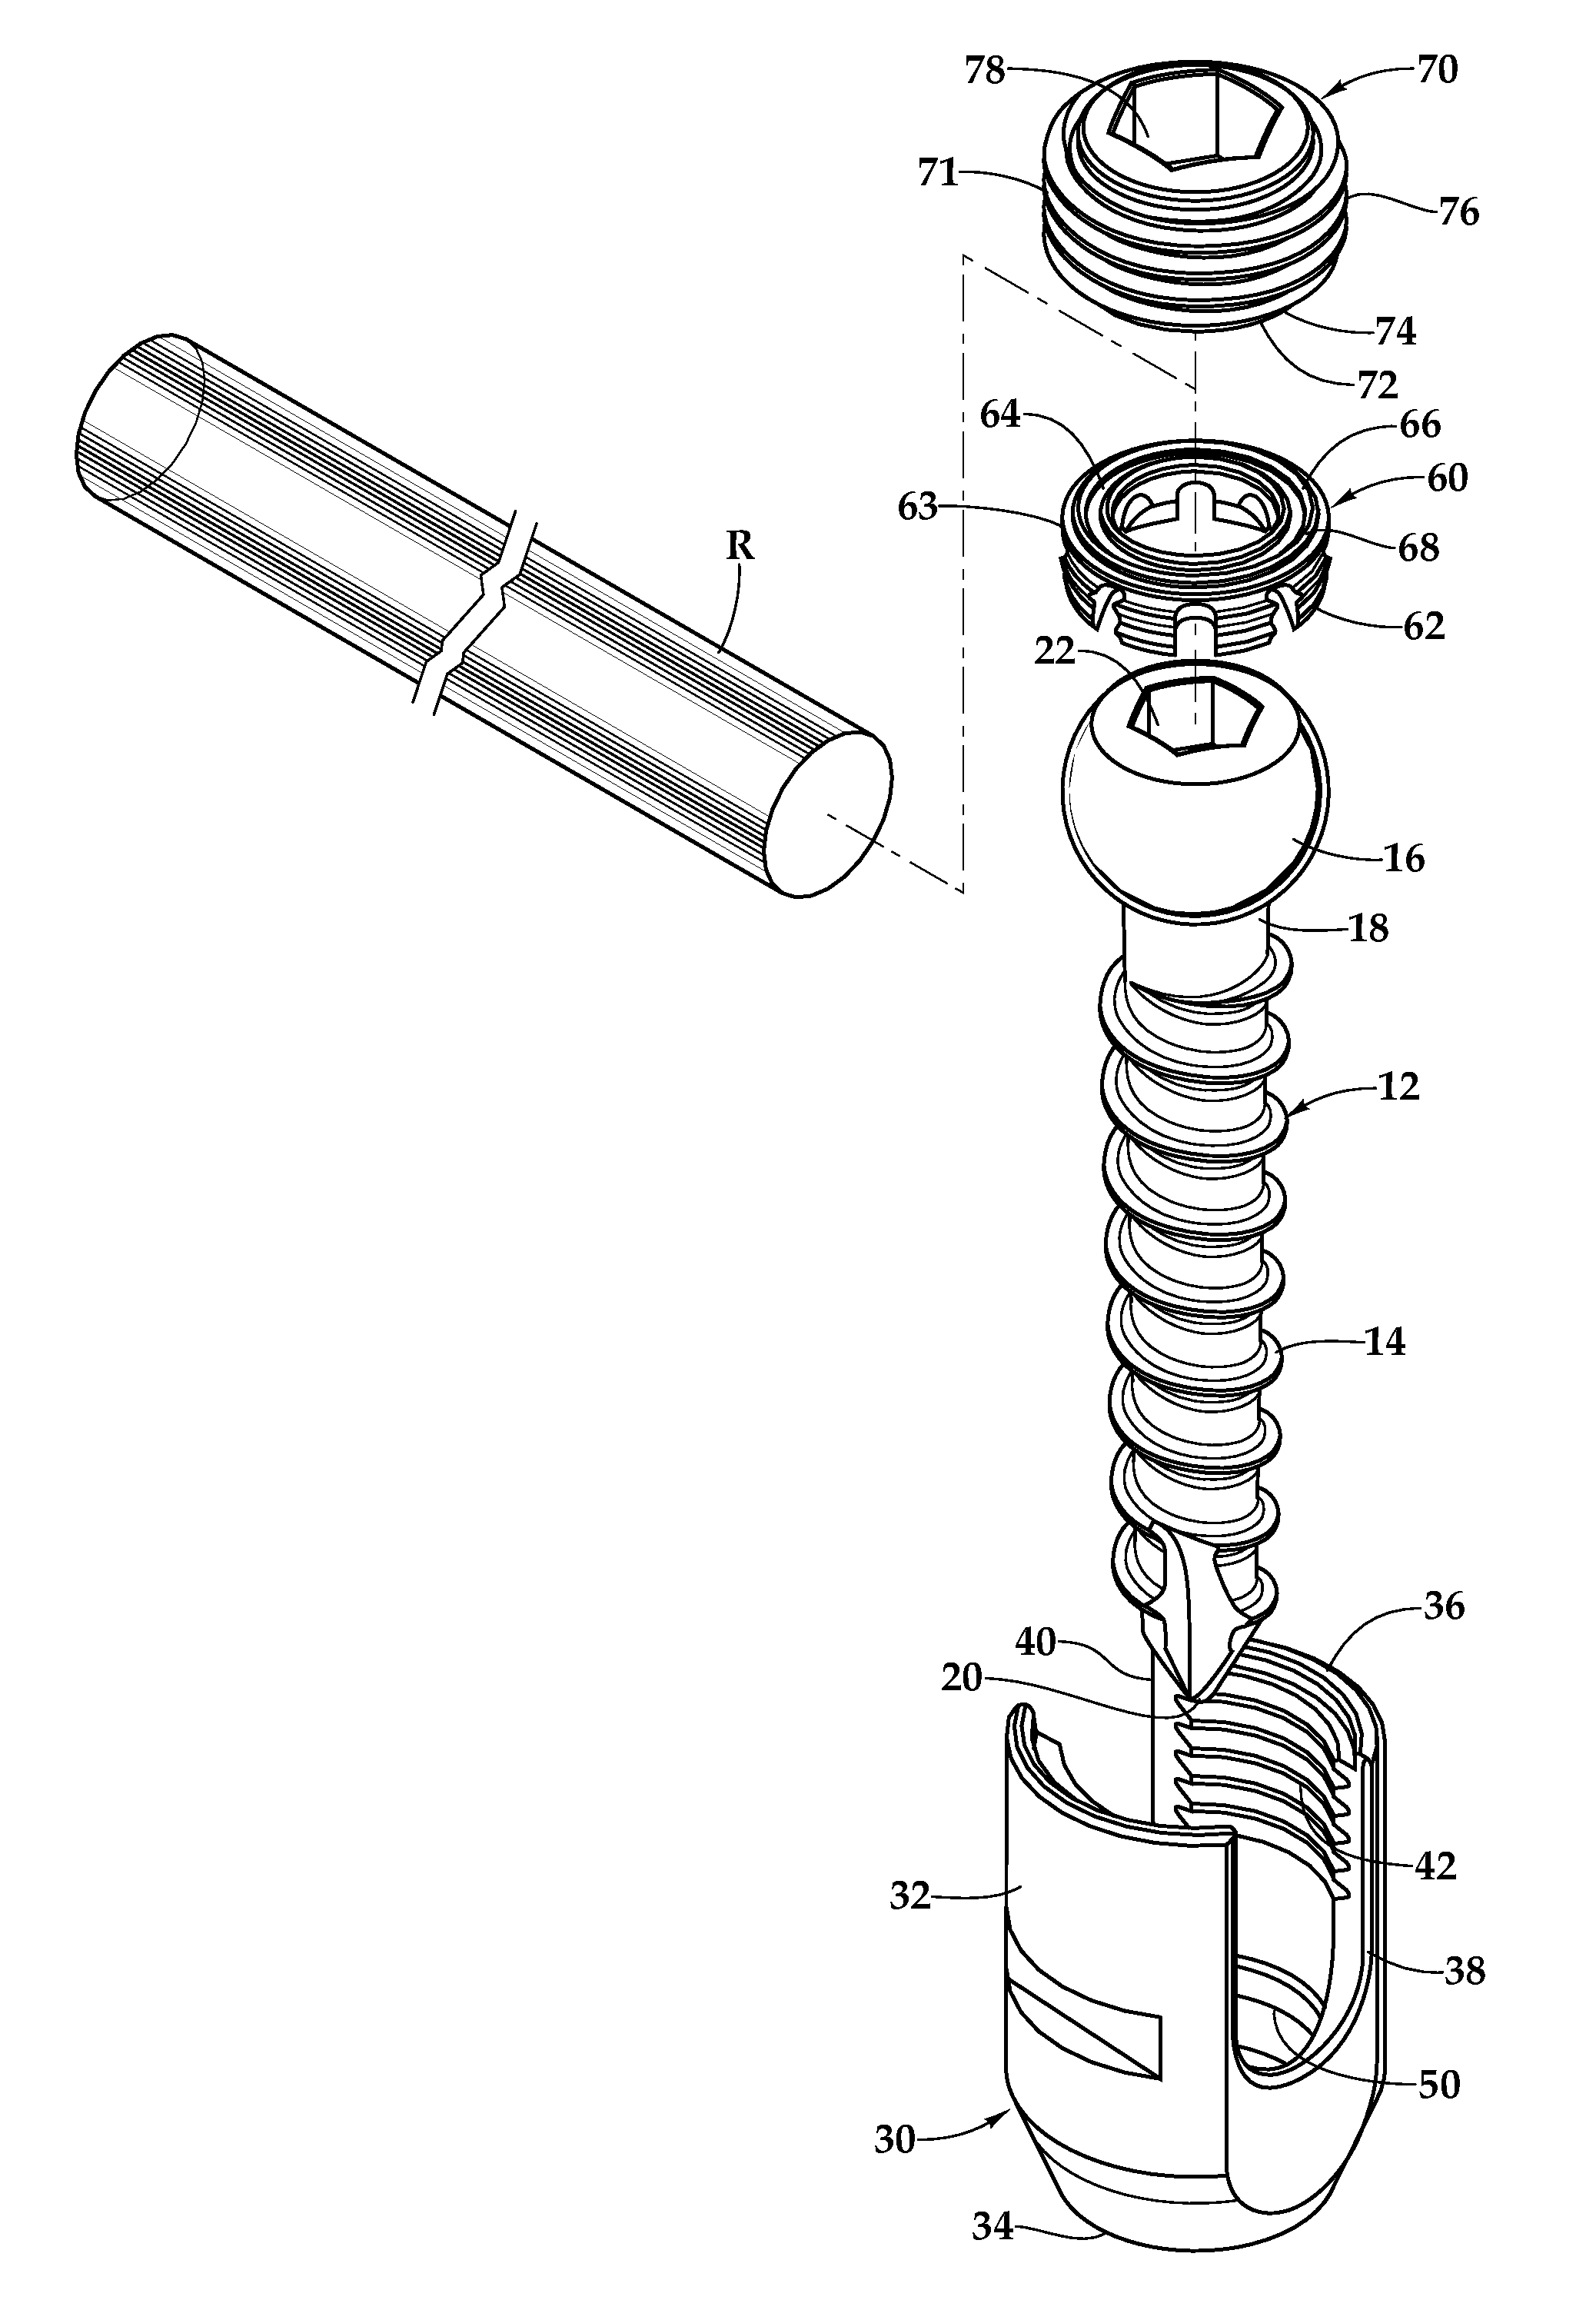 Pedicle screw fixation system and method for use of same